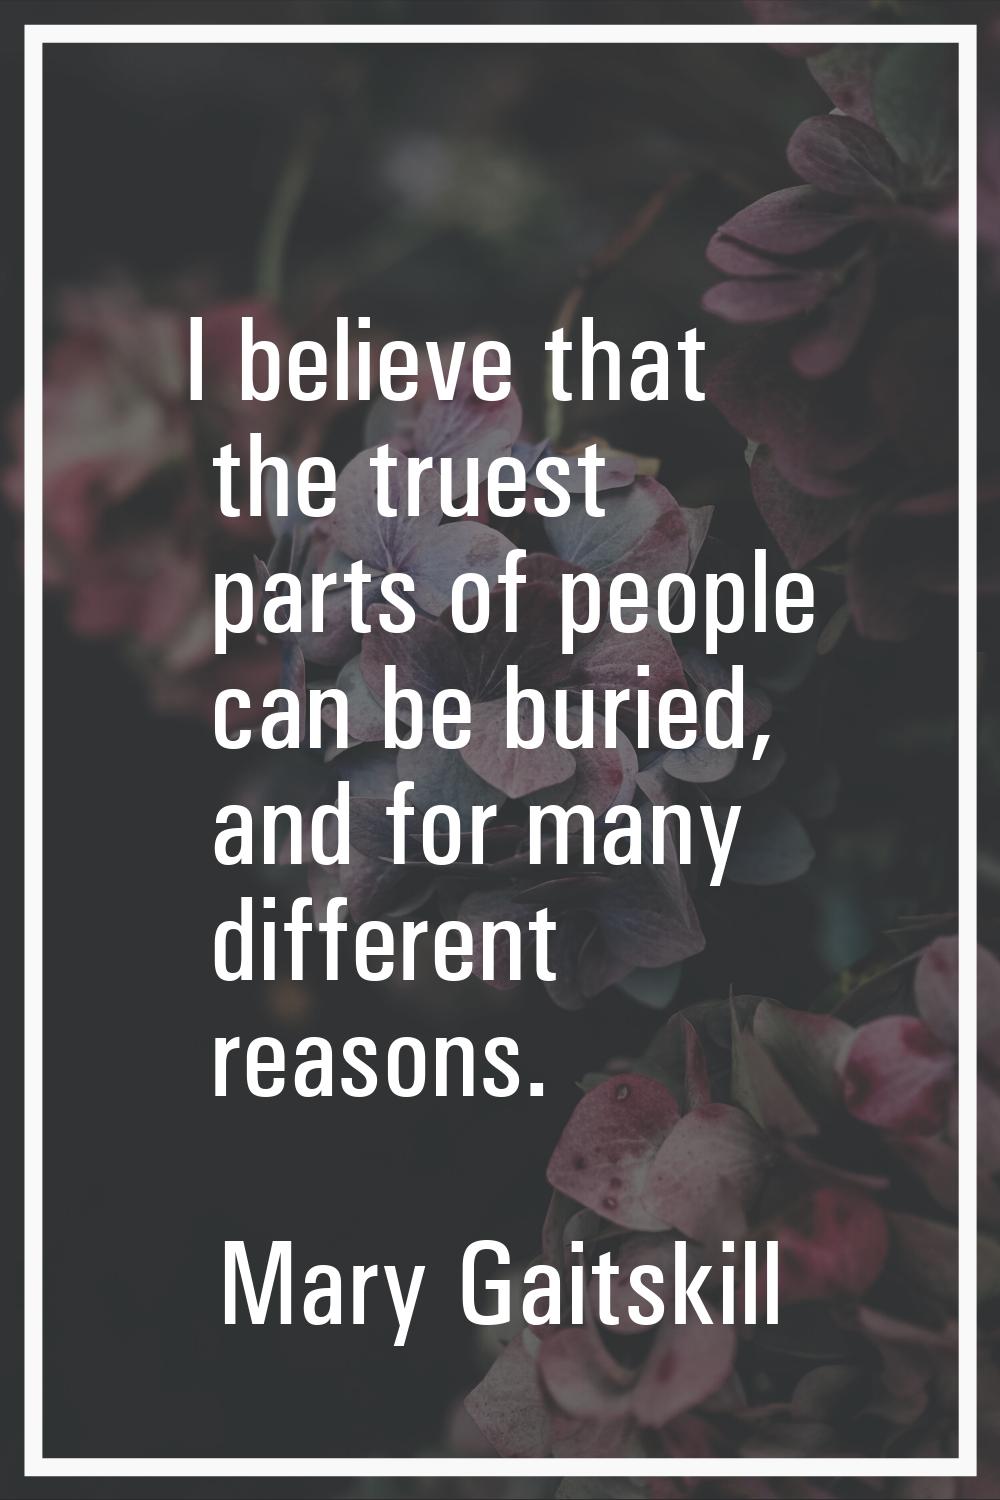 I believe that the truest parts of people can be buried, and for many different reasons.